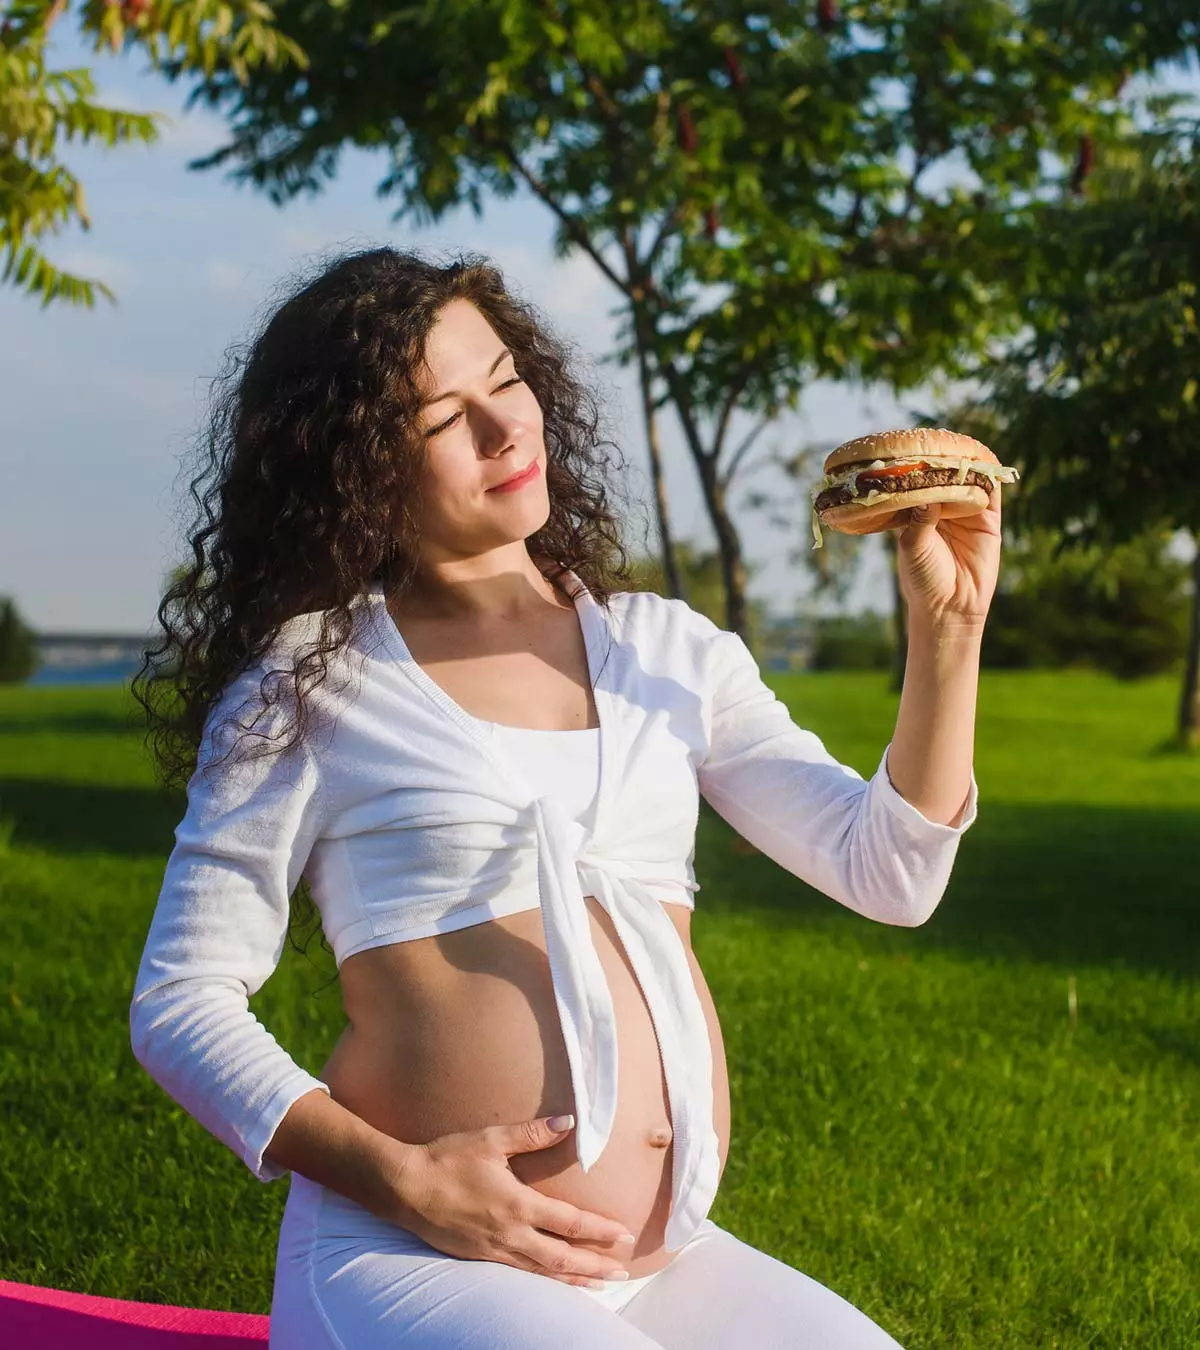 8 Harmful Effects Of Eating Junk Food During Pregnancy